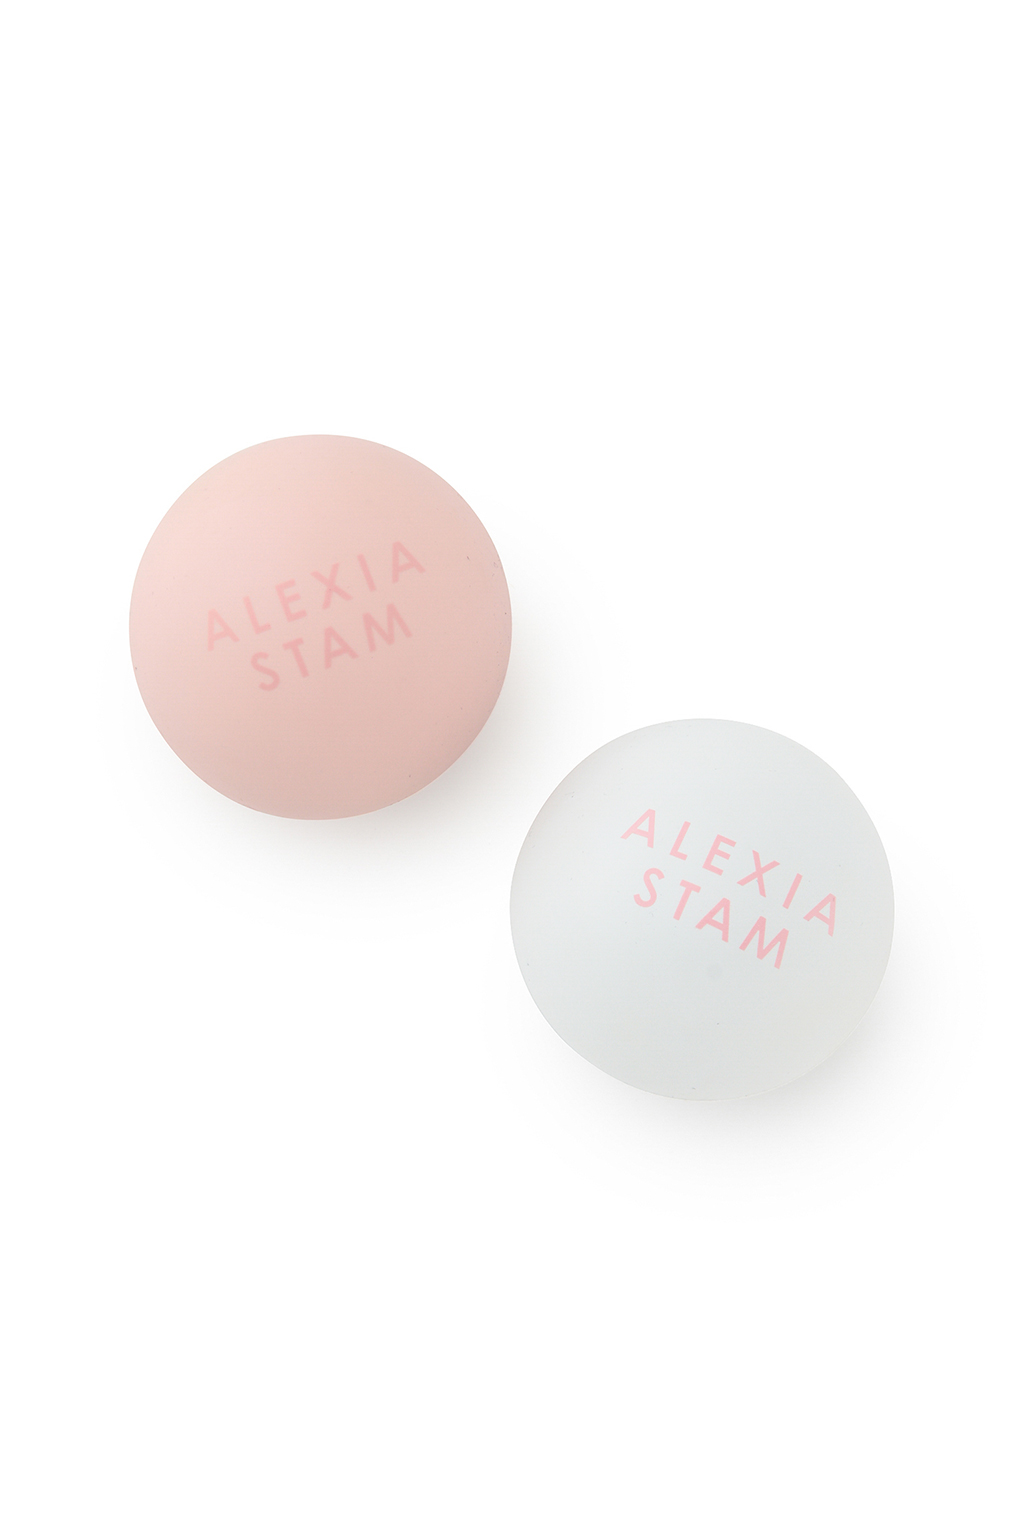 nergy-recovery-ball-white-x-pink-01-1